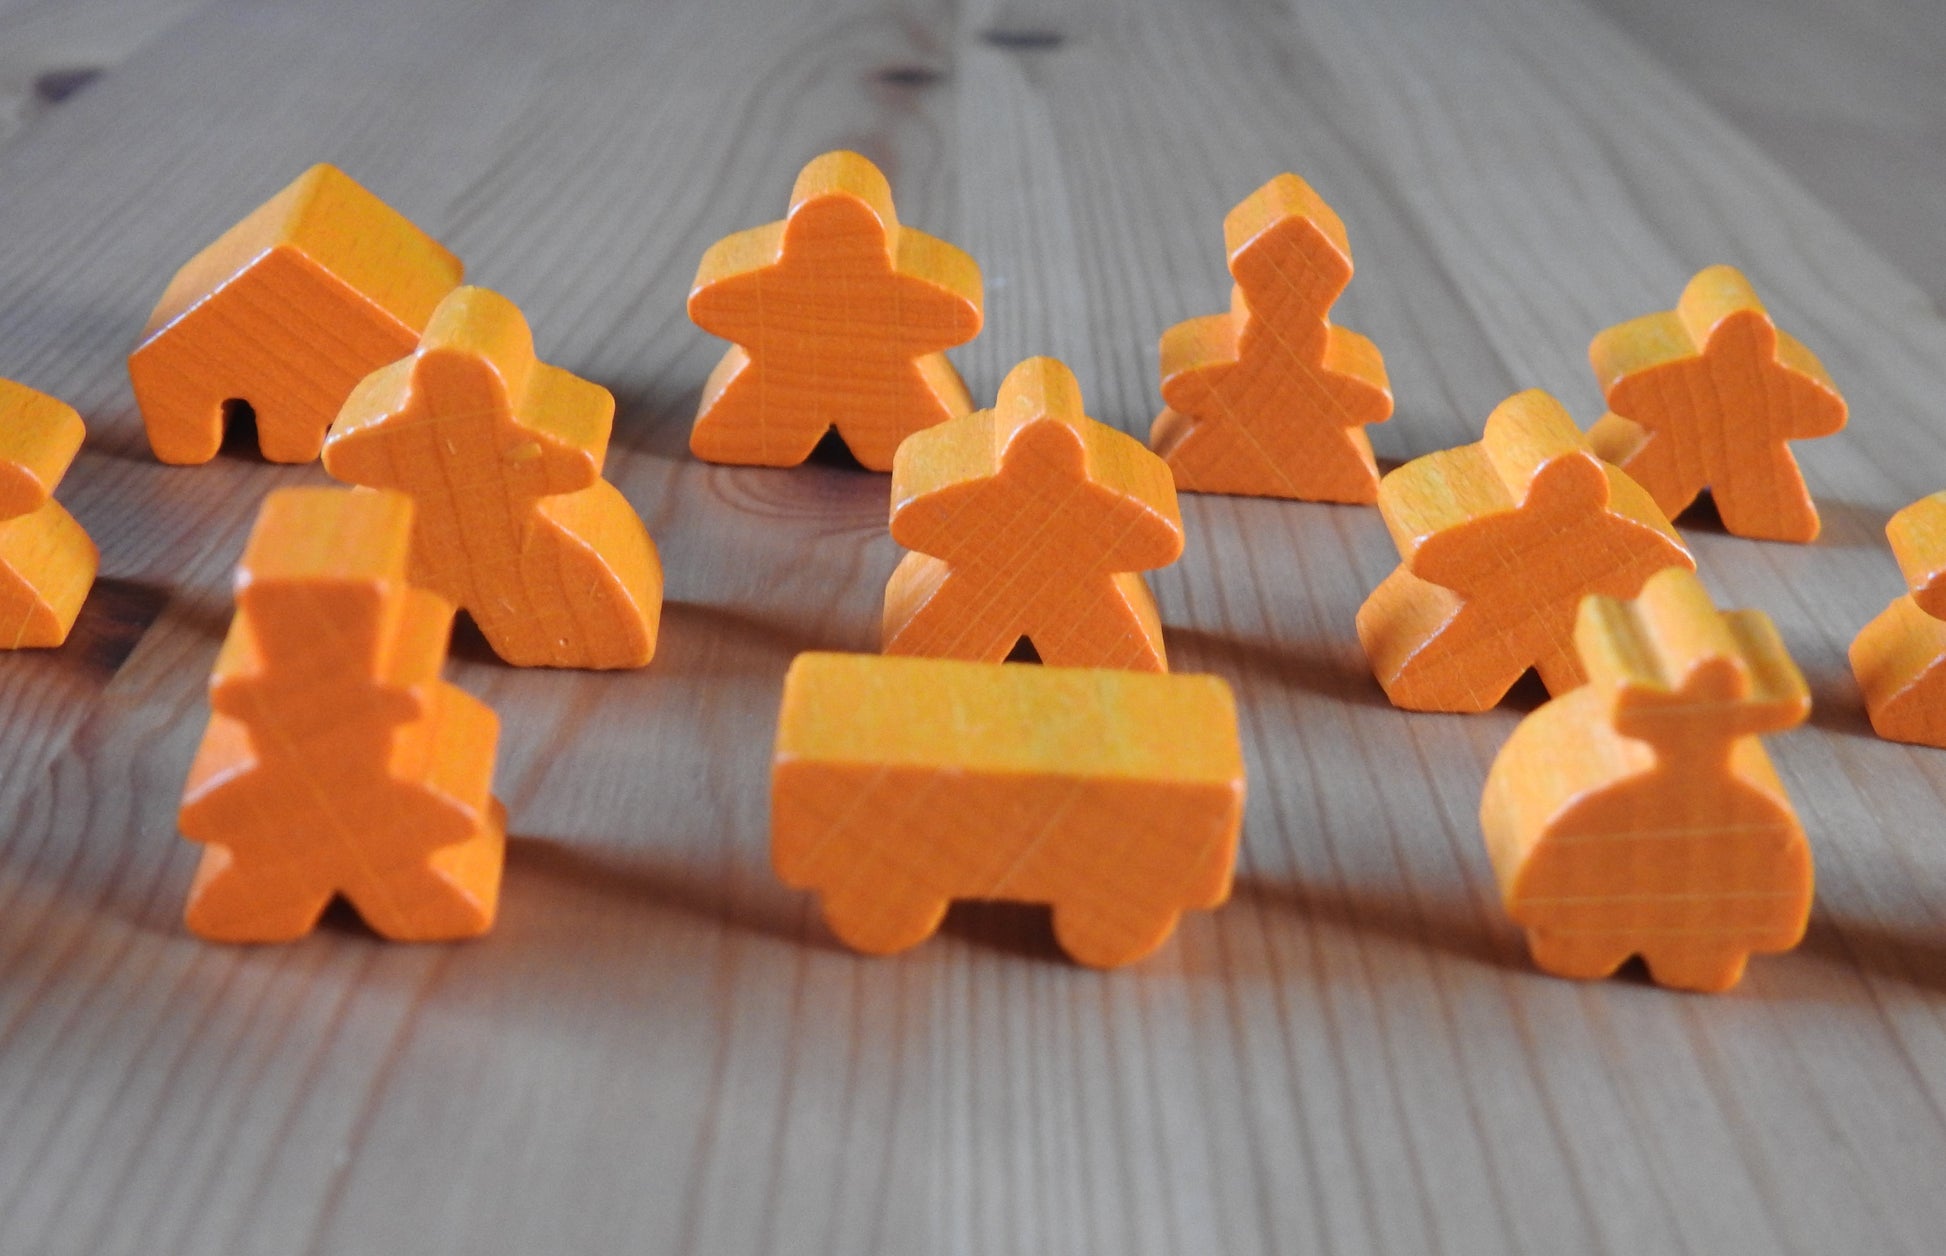 Close-up of the orange ringmaster and other meeples.